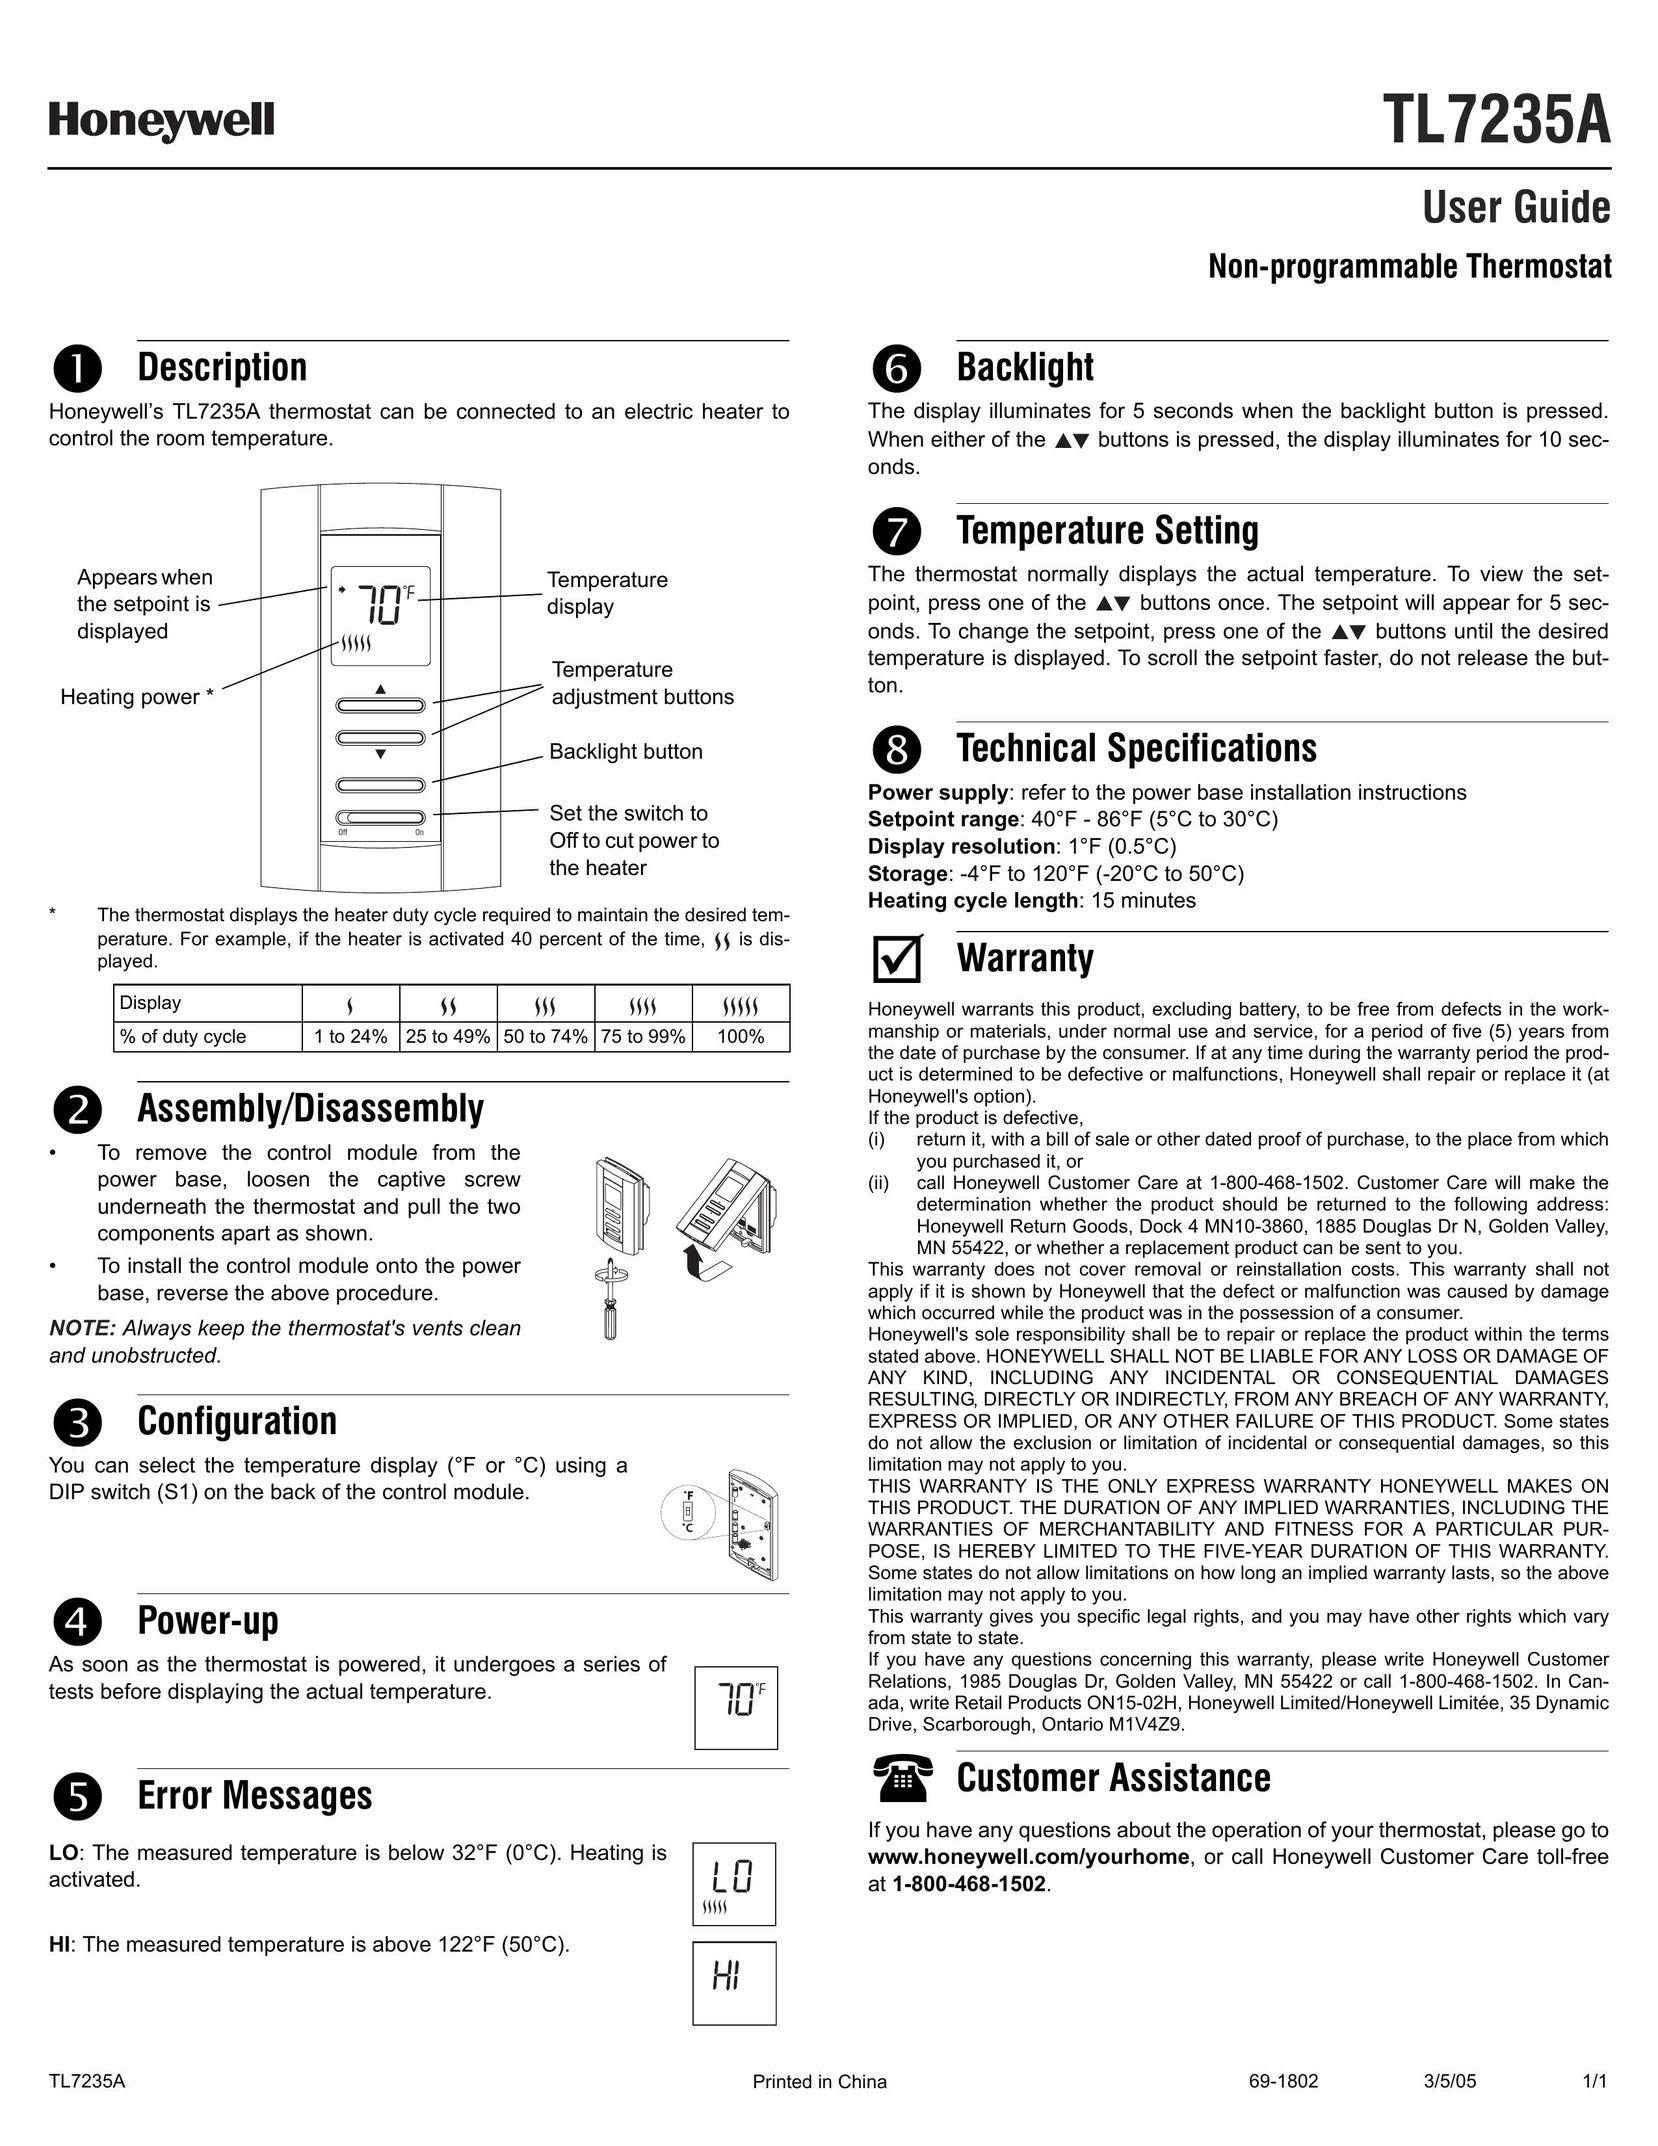 NewAir TL7235A Thermostat User Manual